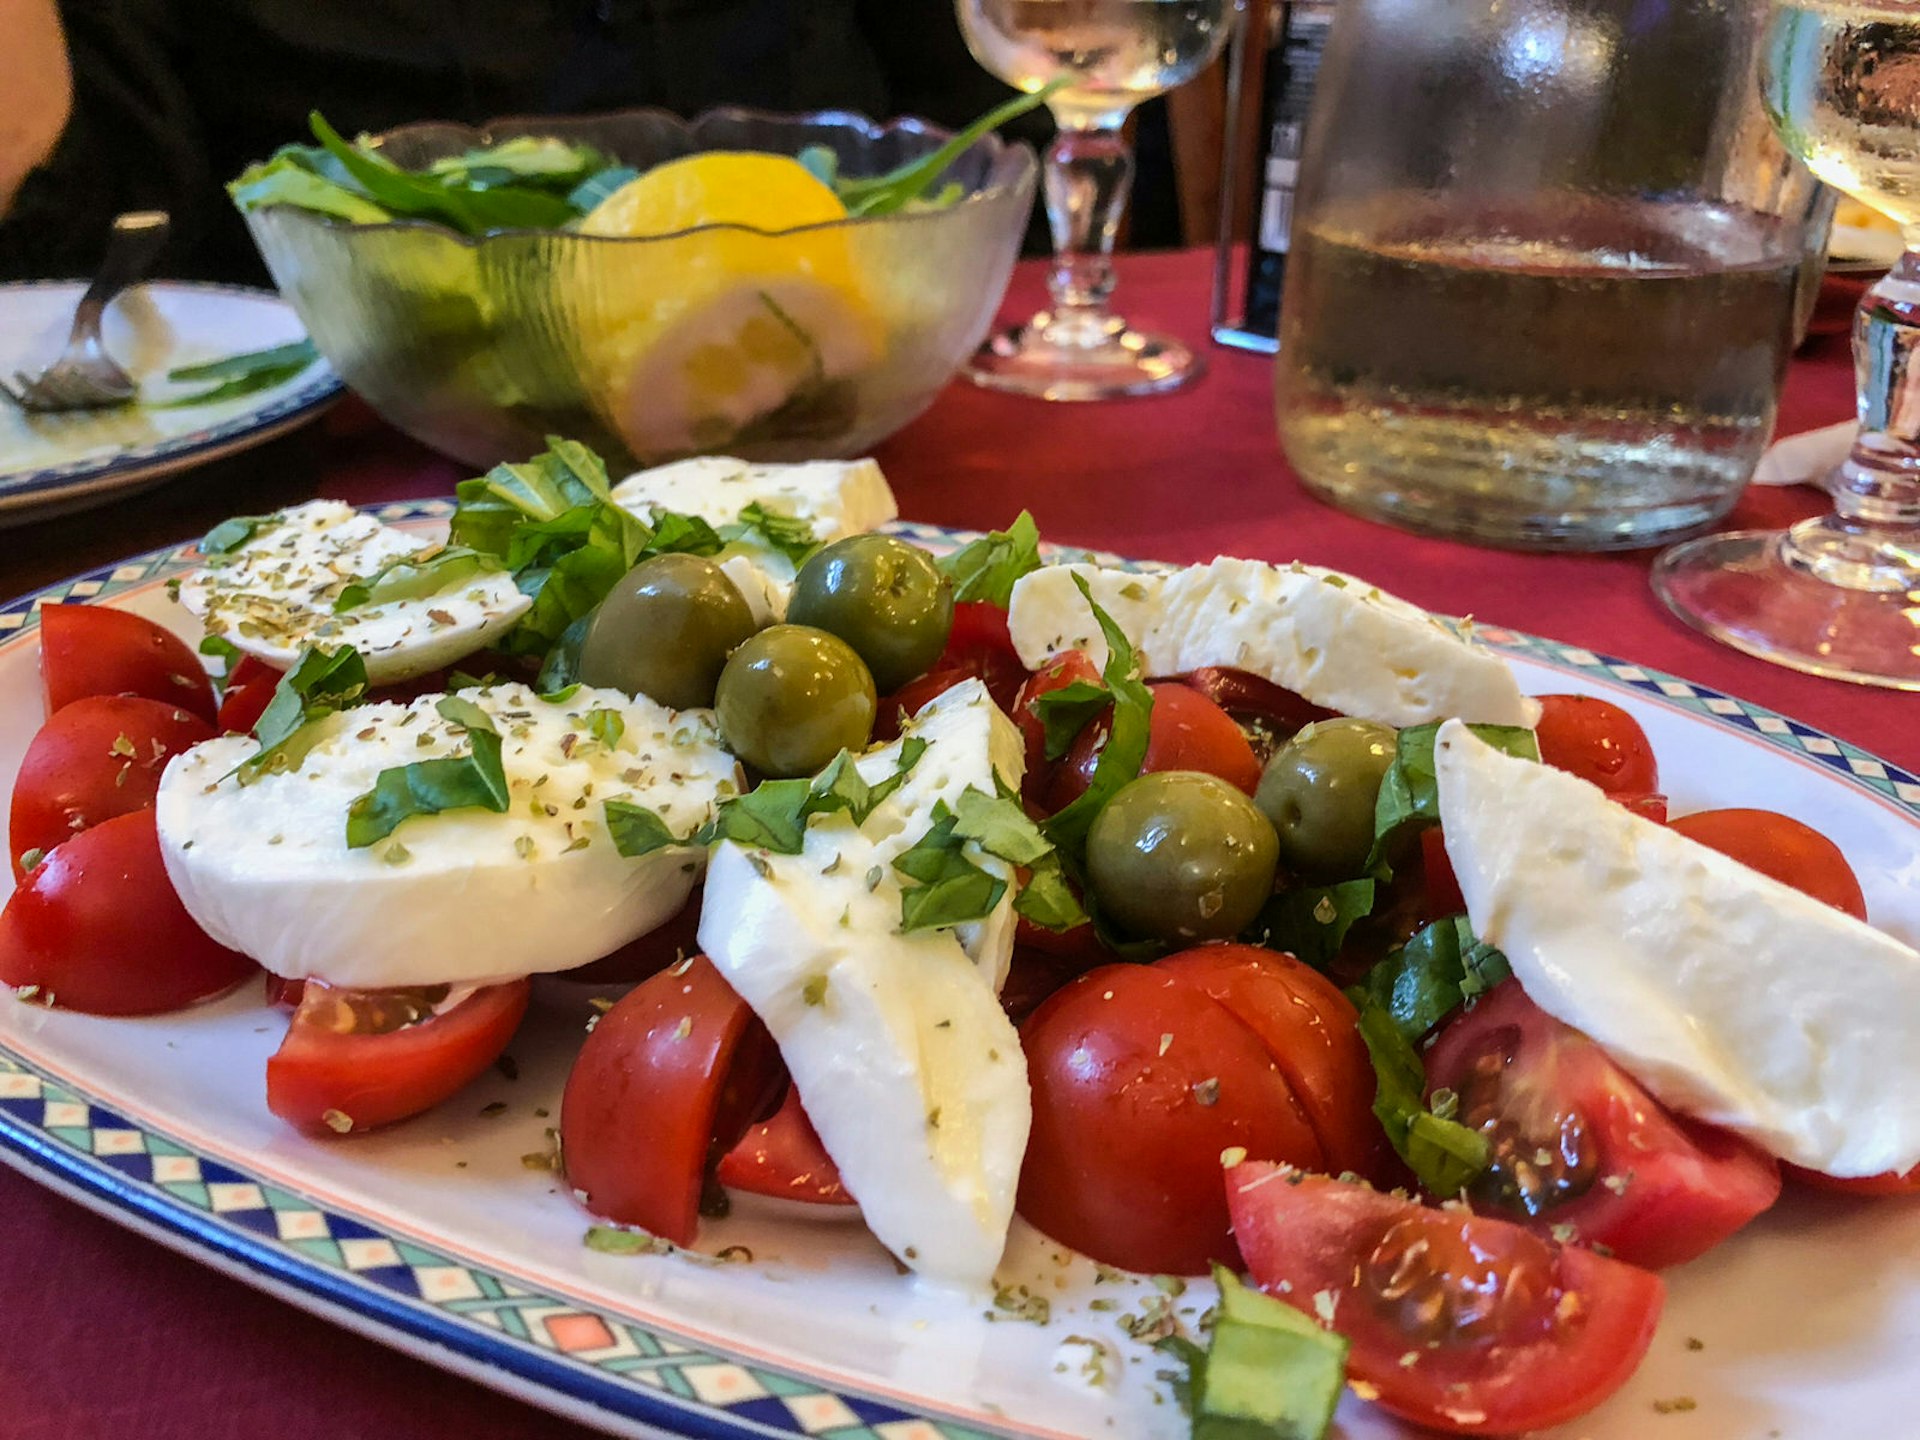 Caprese Salad with mozzarella cheese, tomato, basil and olives on table at Island of Ischia, Campania, Italy.